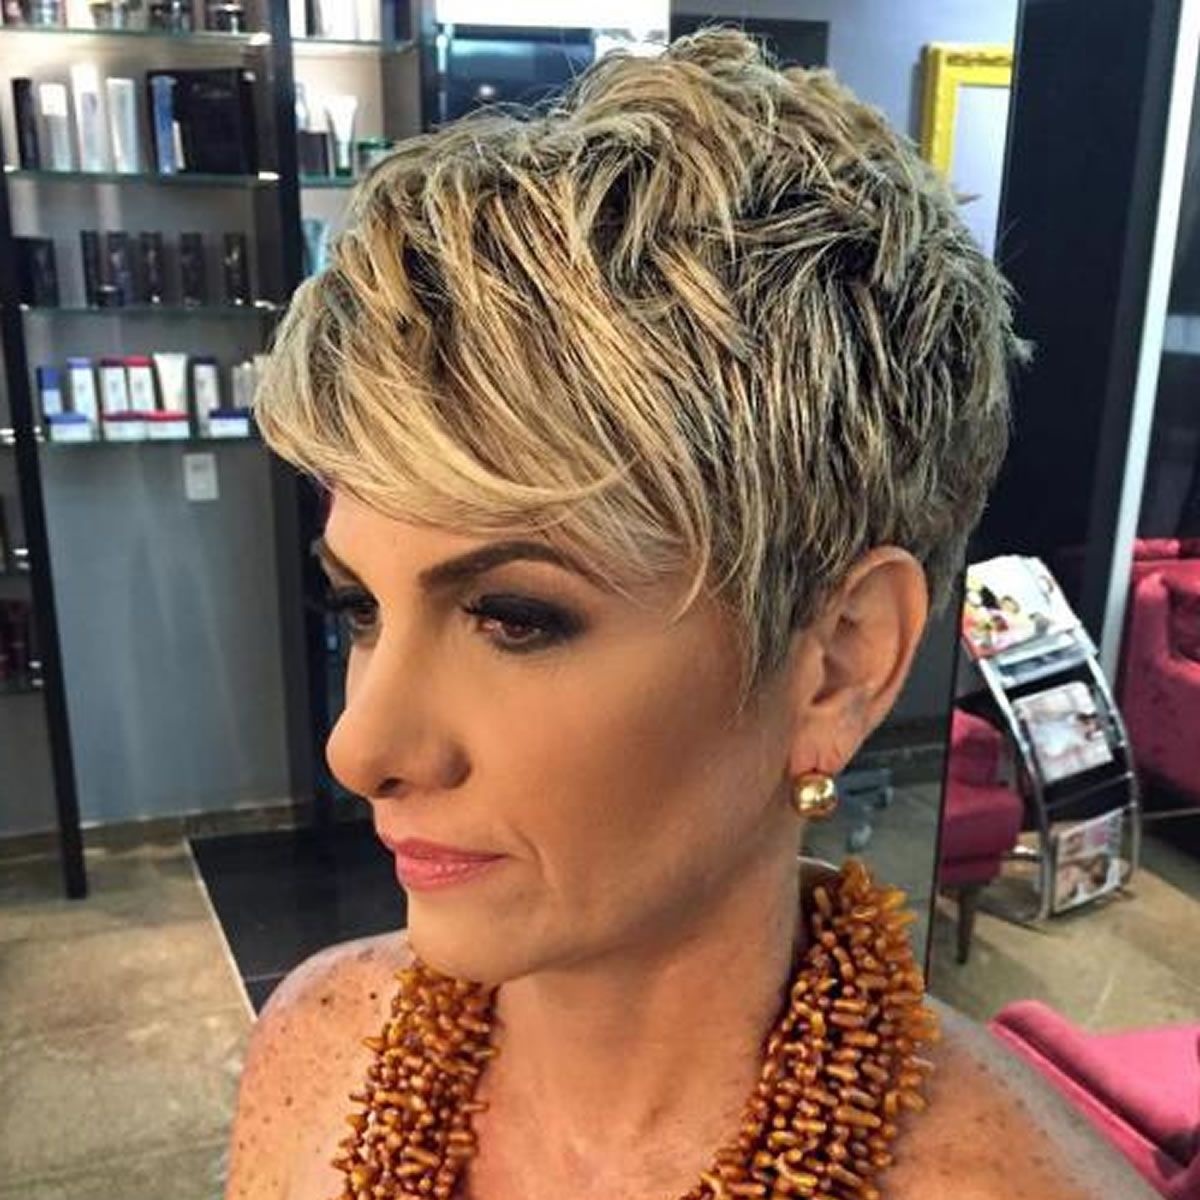 Most Current Punky Pixie Haircuts For Over 60 Throughout 10 Prettiest Pixie Haircuts For Women Over 60 – Short Hairstyles  (View 10 of 20)